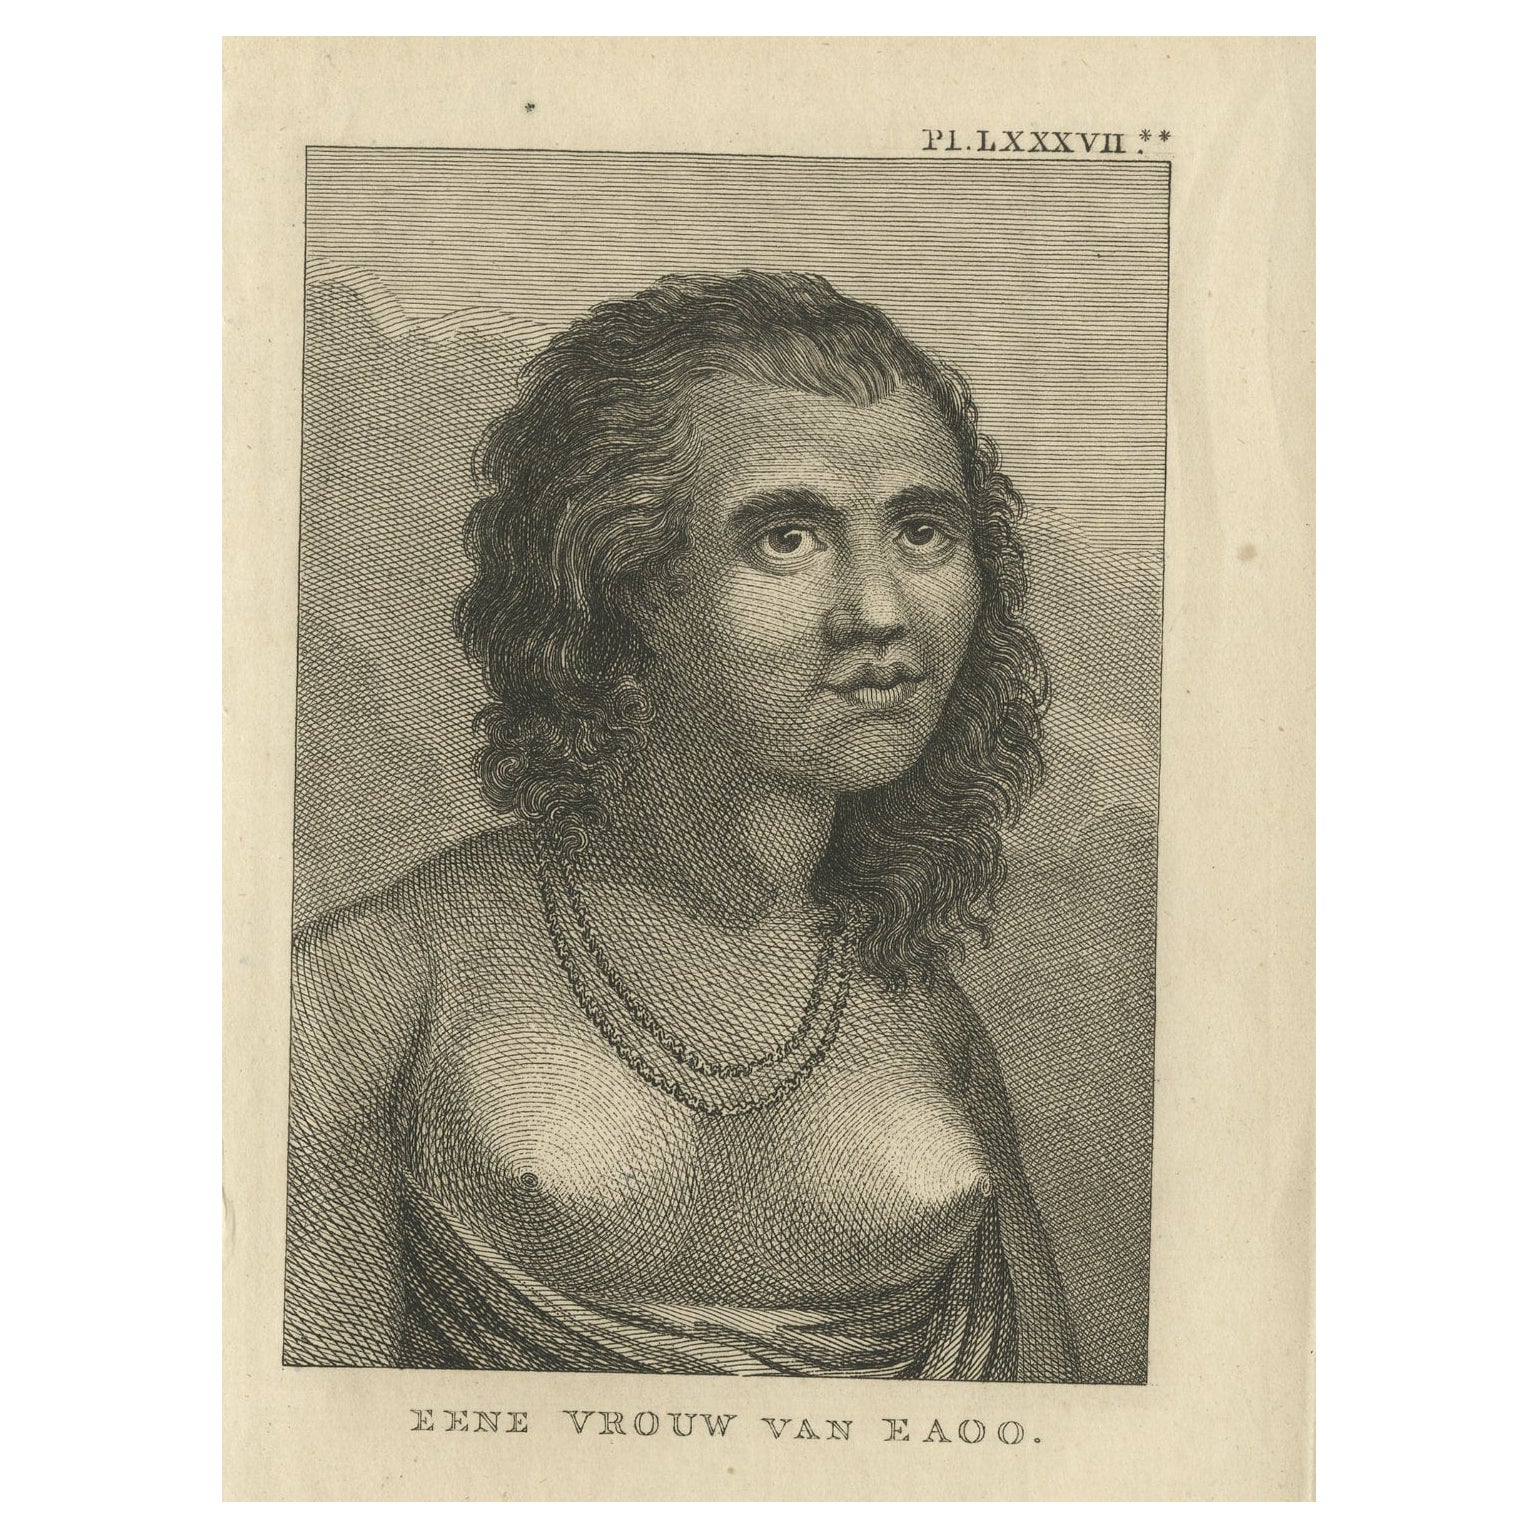 Rare Antique Engraving of a Beautiful Woman of Eaoo in Tonga, by Cook, 1803